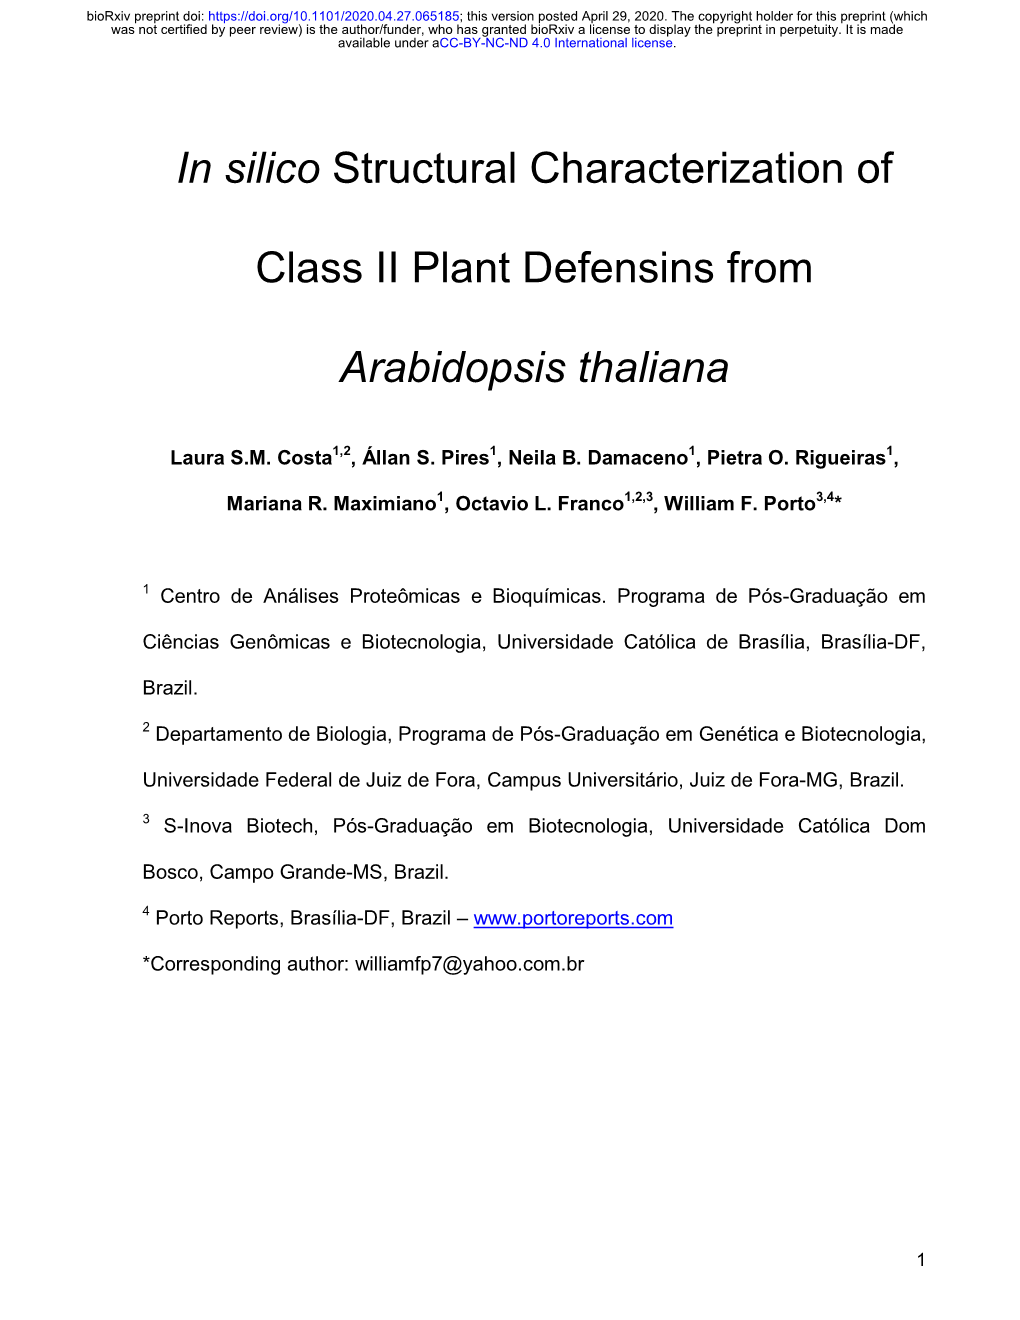 In Silico Structural Characterization of Class II Plant Defensins